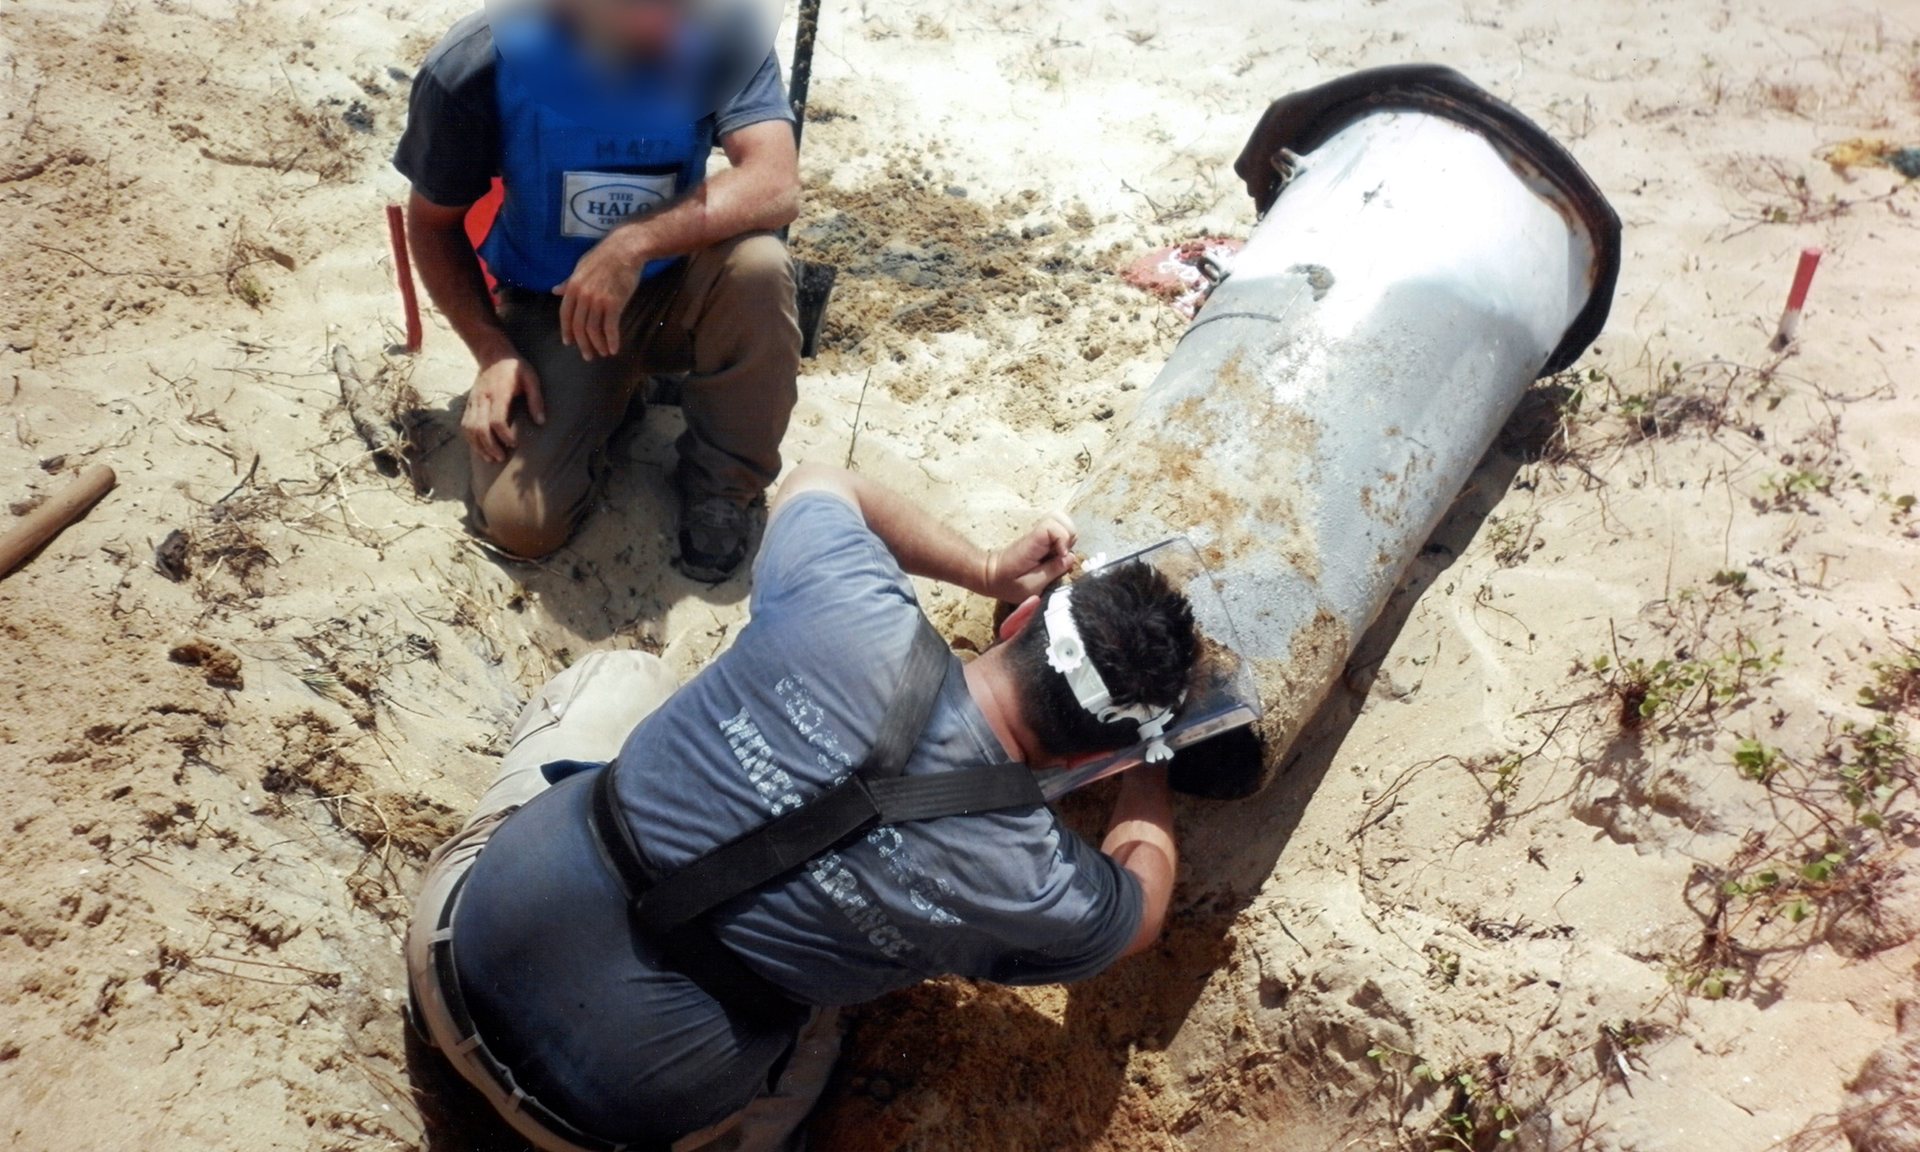 Leaked photos confirm cluster bomb use in Sri Lanka 